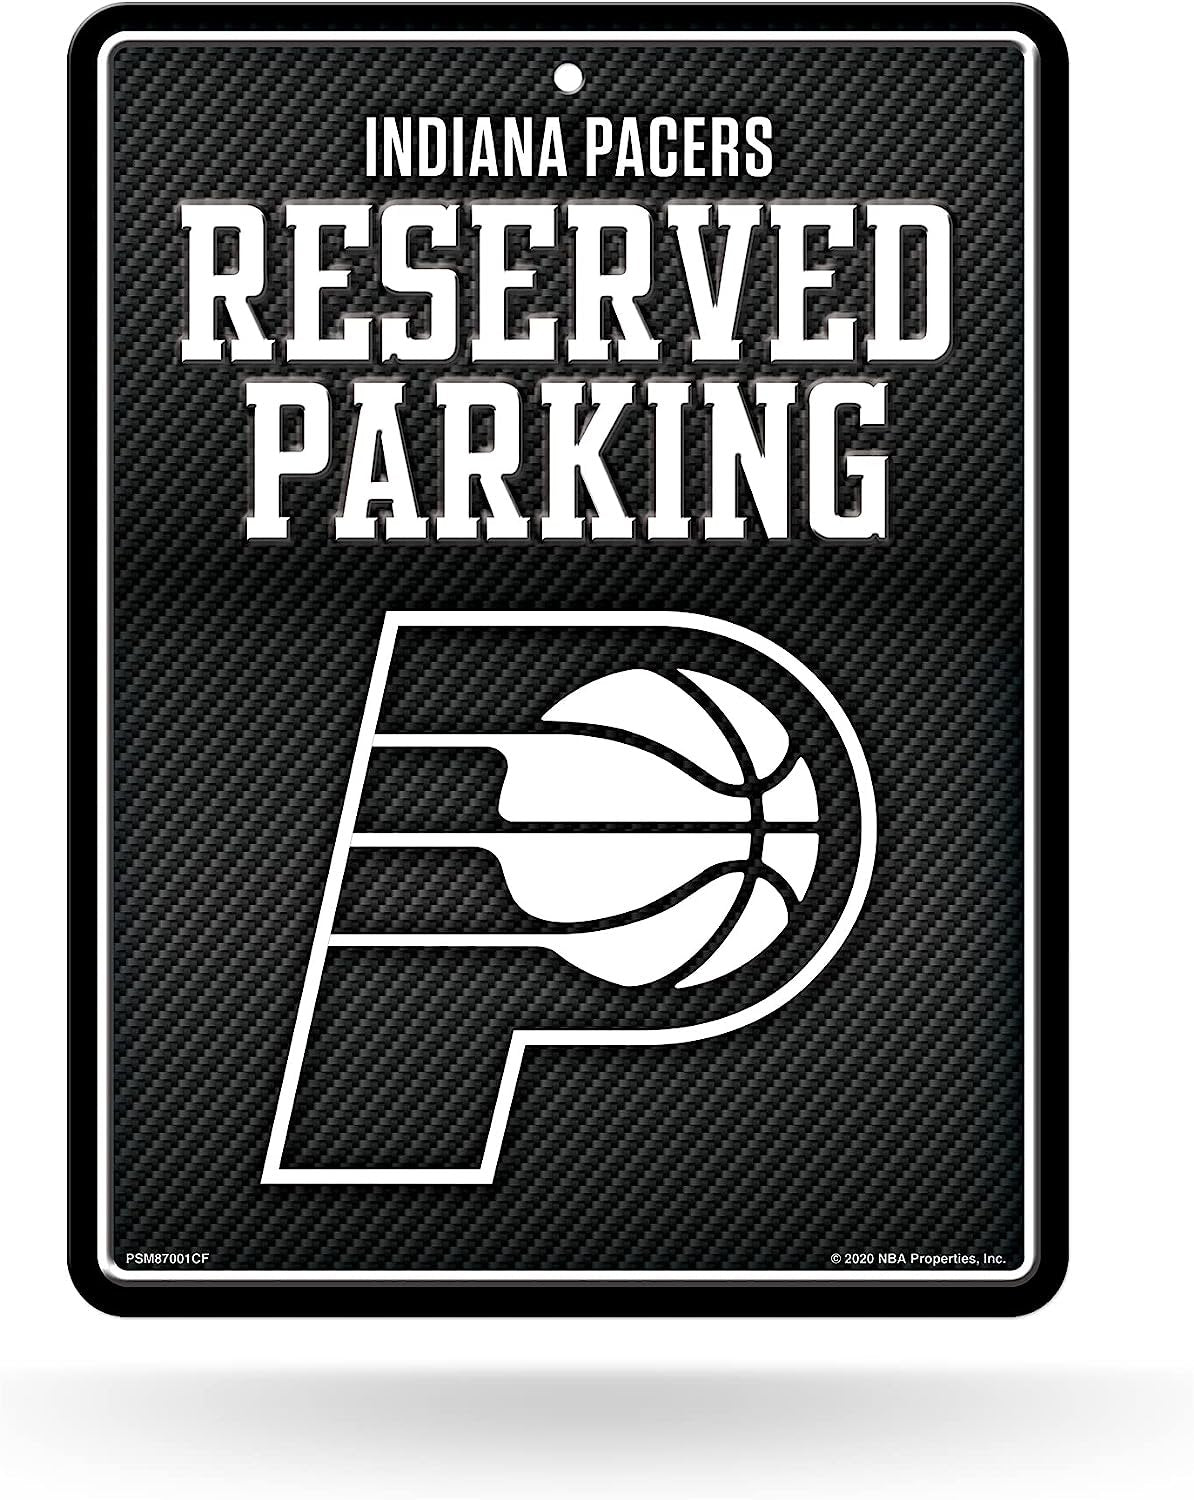 Indiana Pacers Metal Parking Novelty Wall Sign 8.5 x 11 Inch Carbon Fiber Design